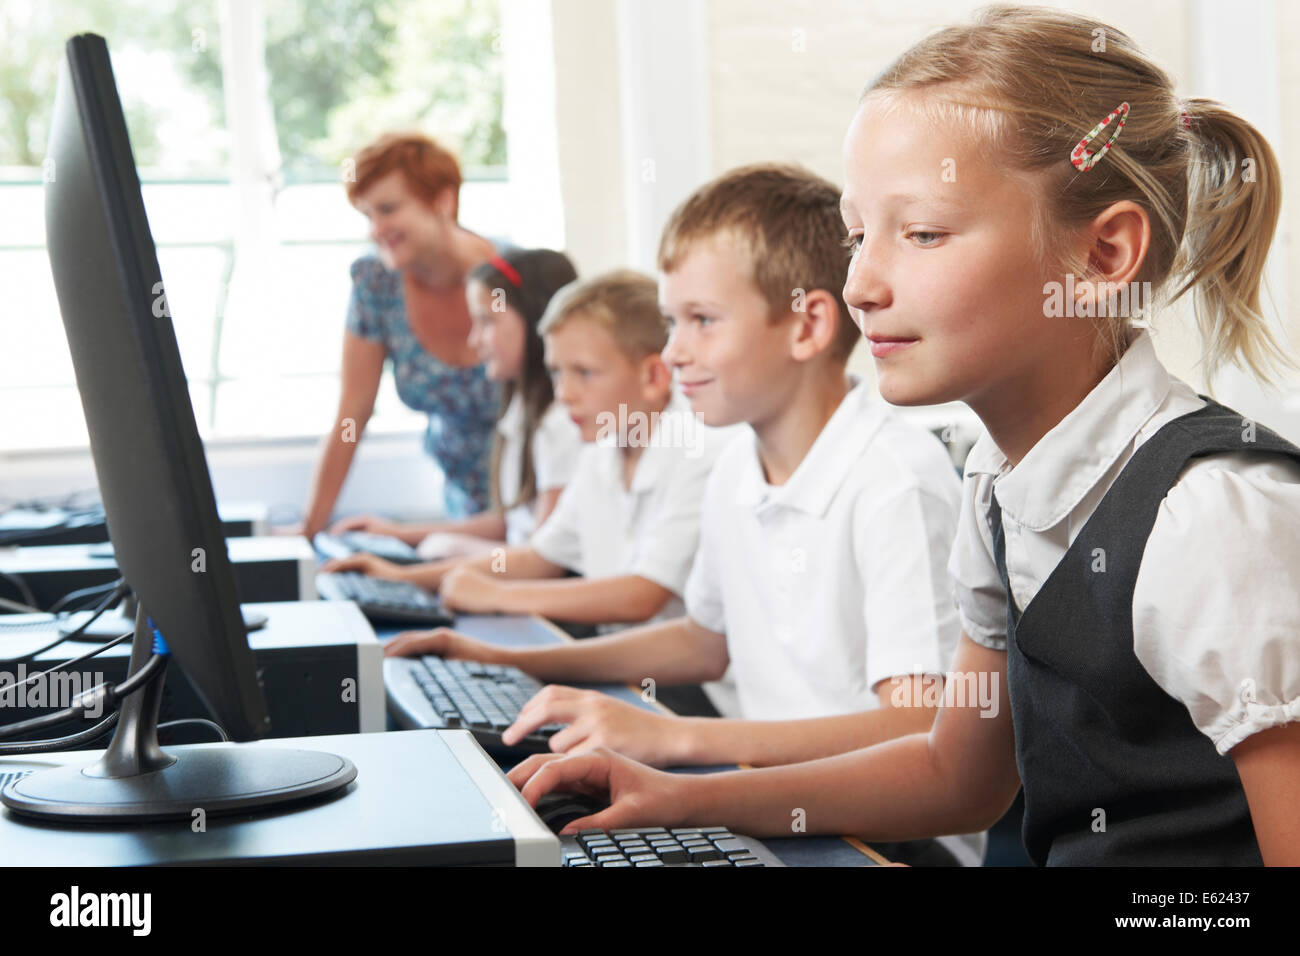 Group Of Elementary Pupils In Computer Class With Teacher Stock Photo